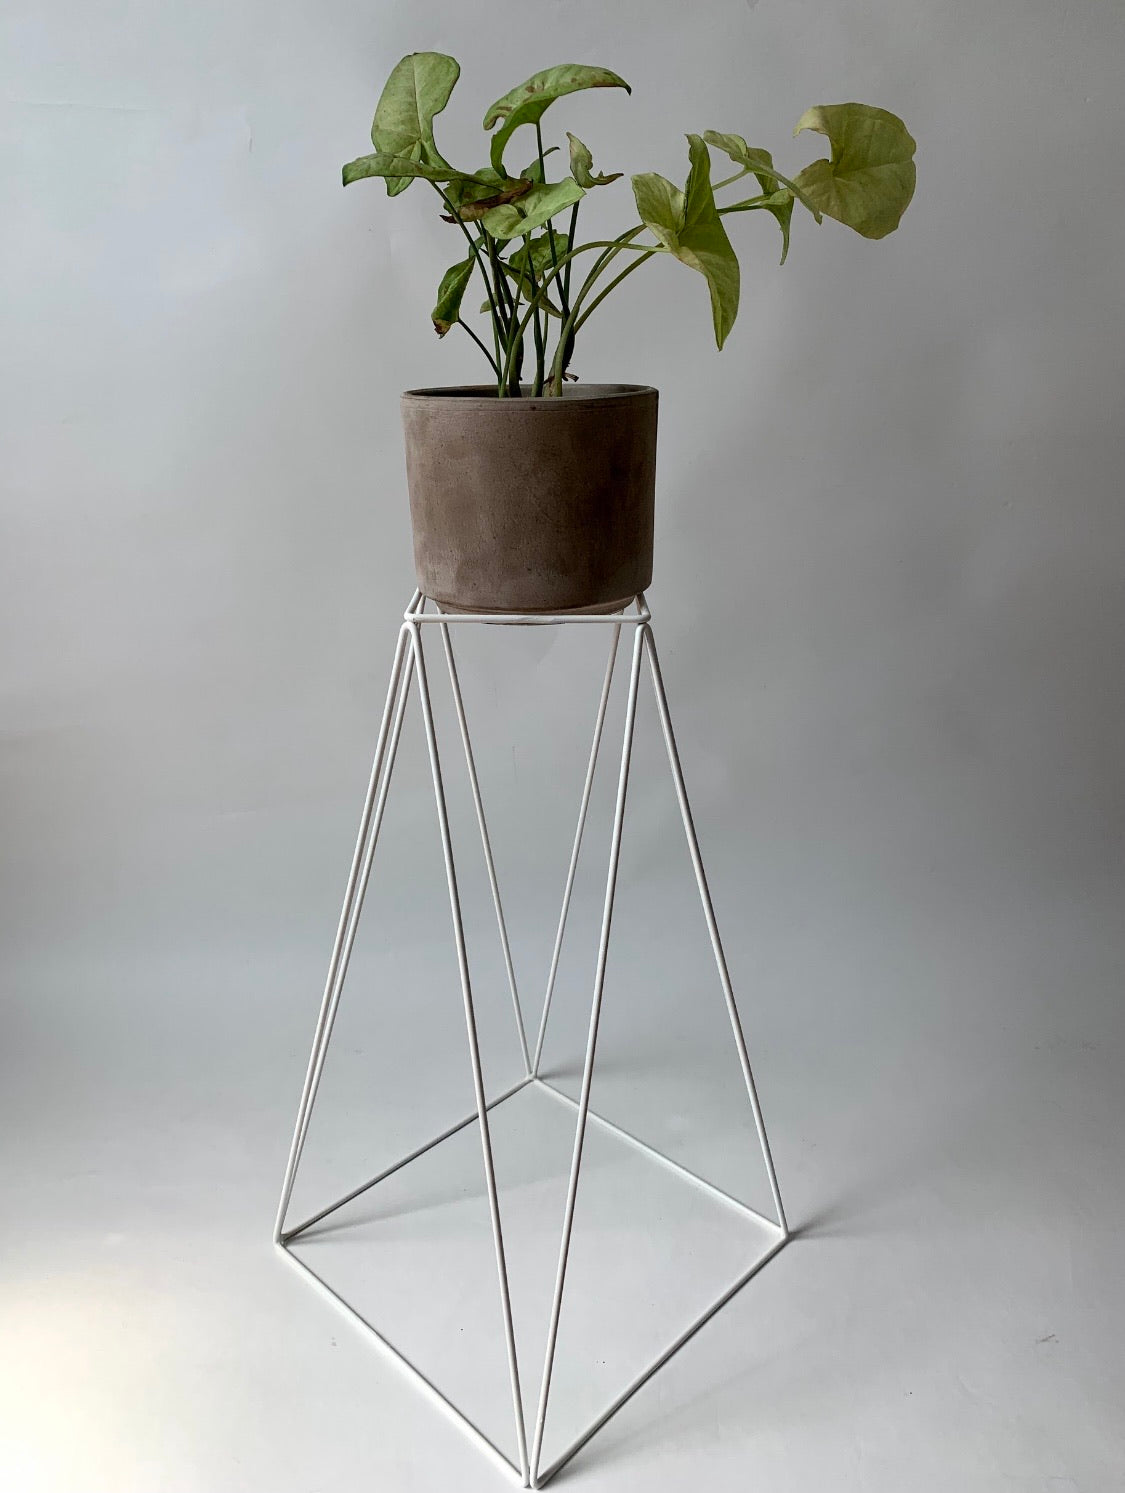 Tall Boy 22" Plant Stand